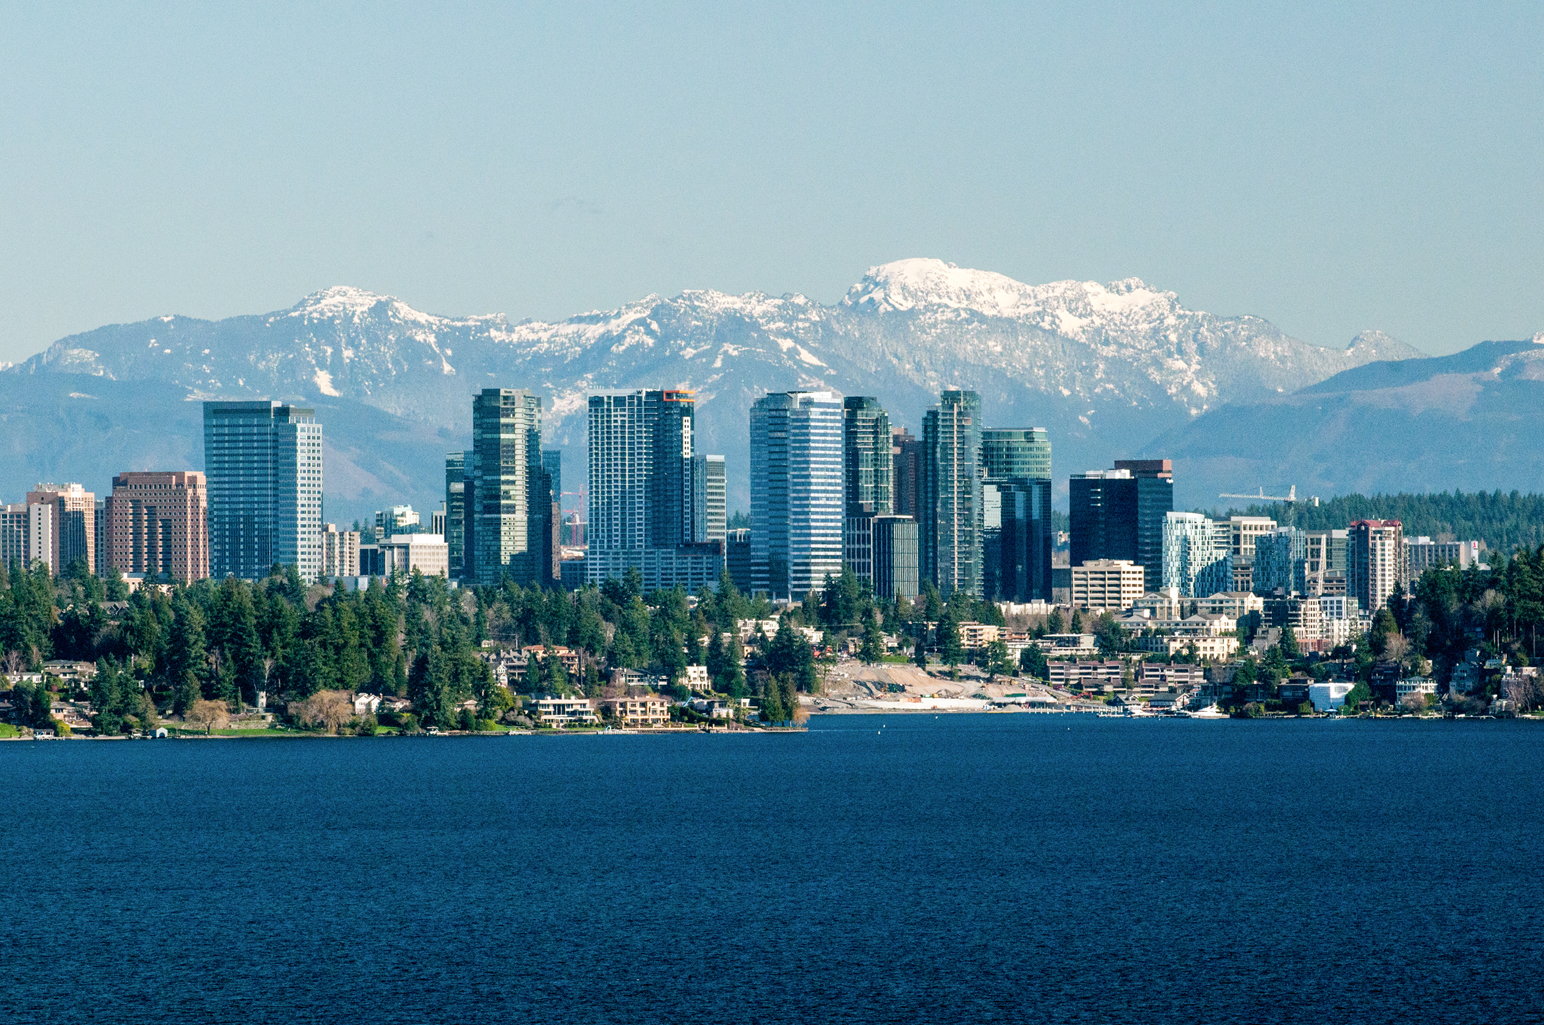 Skyline of Bellevue with the city buildings at the forefront and the mountains in the background.